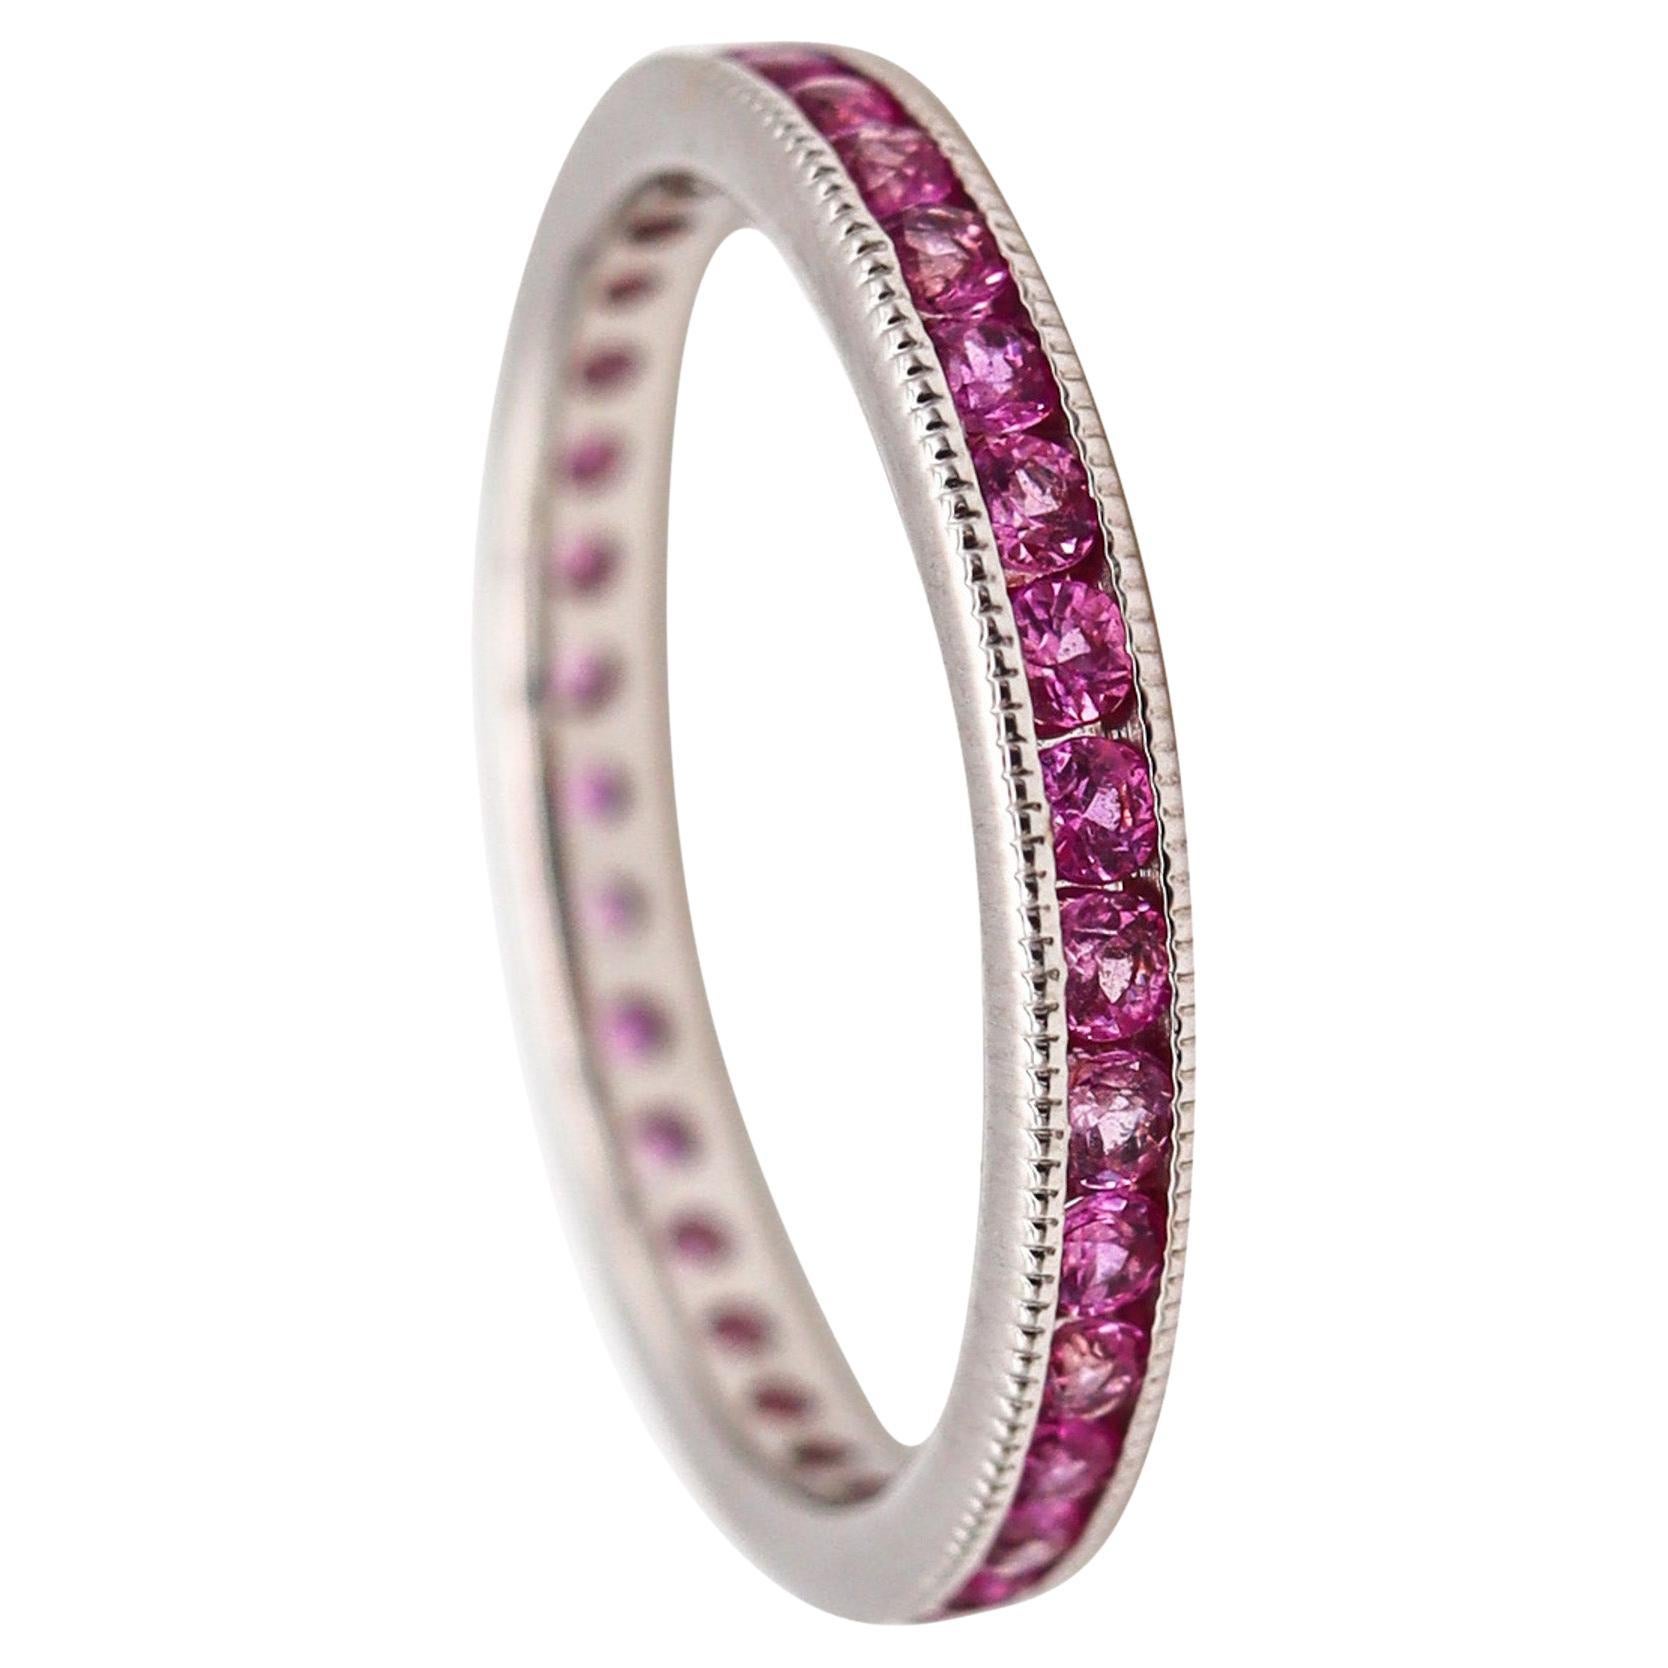 Ogi Eternity Band Ring in 18kt White Gold with 1.40ctw in Vivid Pink Sapphires For Sale